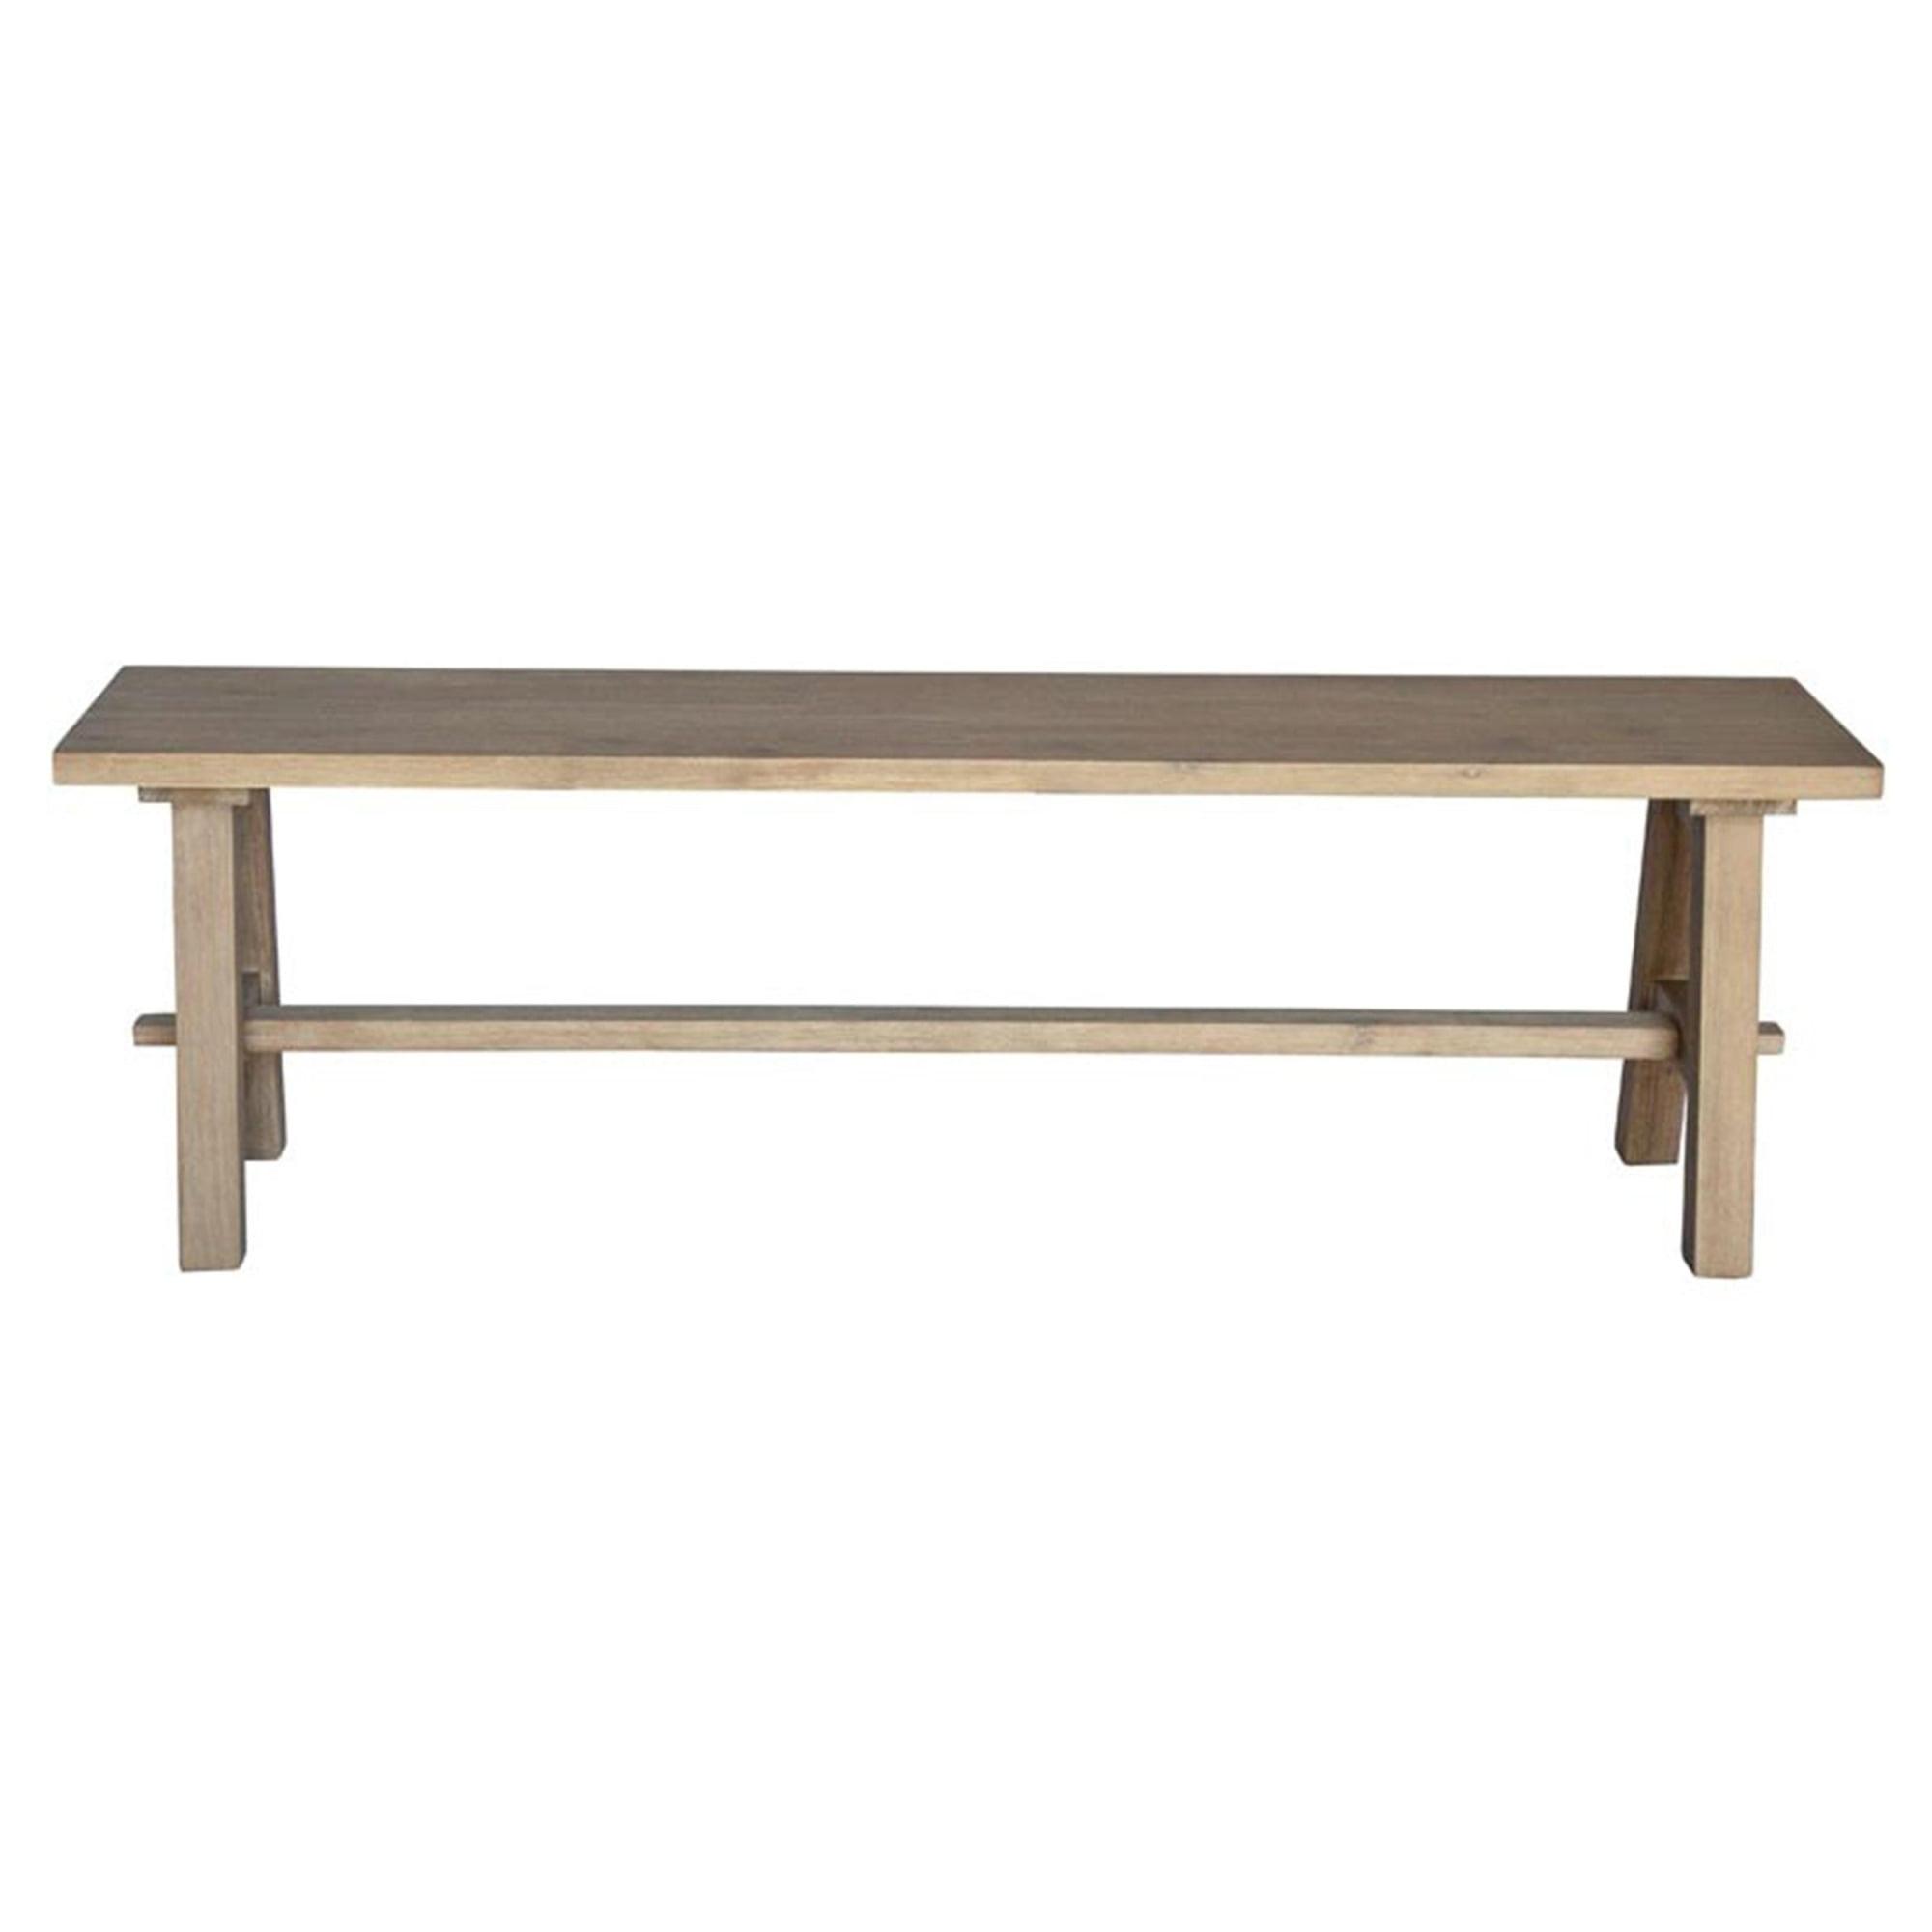 Bedford 59" Brushed Smoke Acacia Wood Dining Bench with Leather Seat